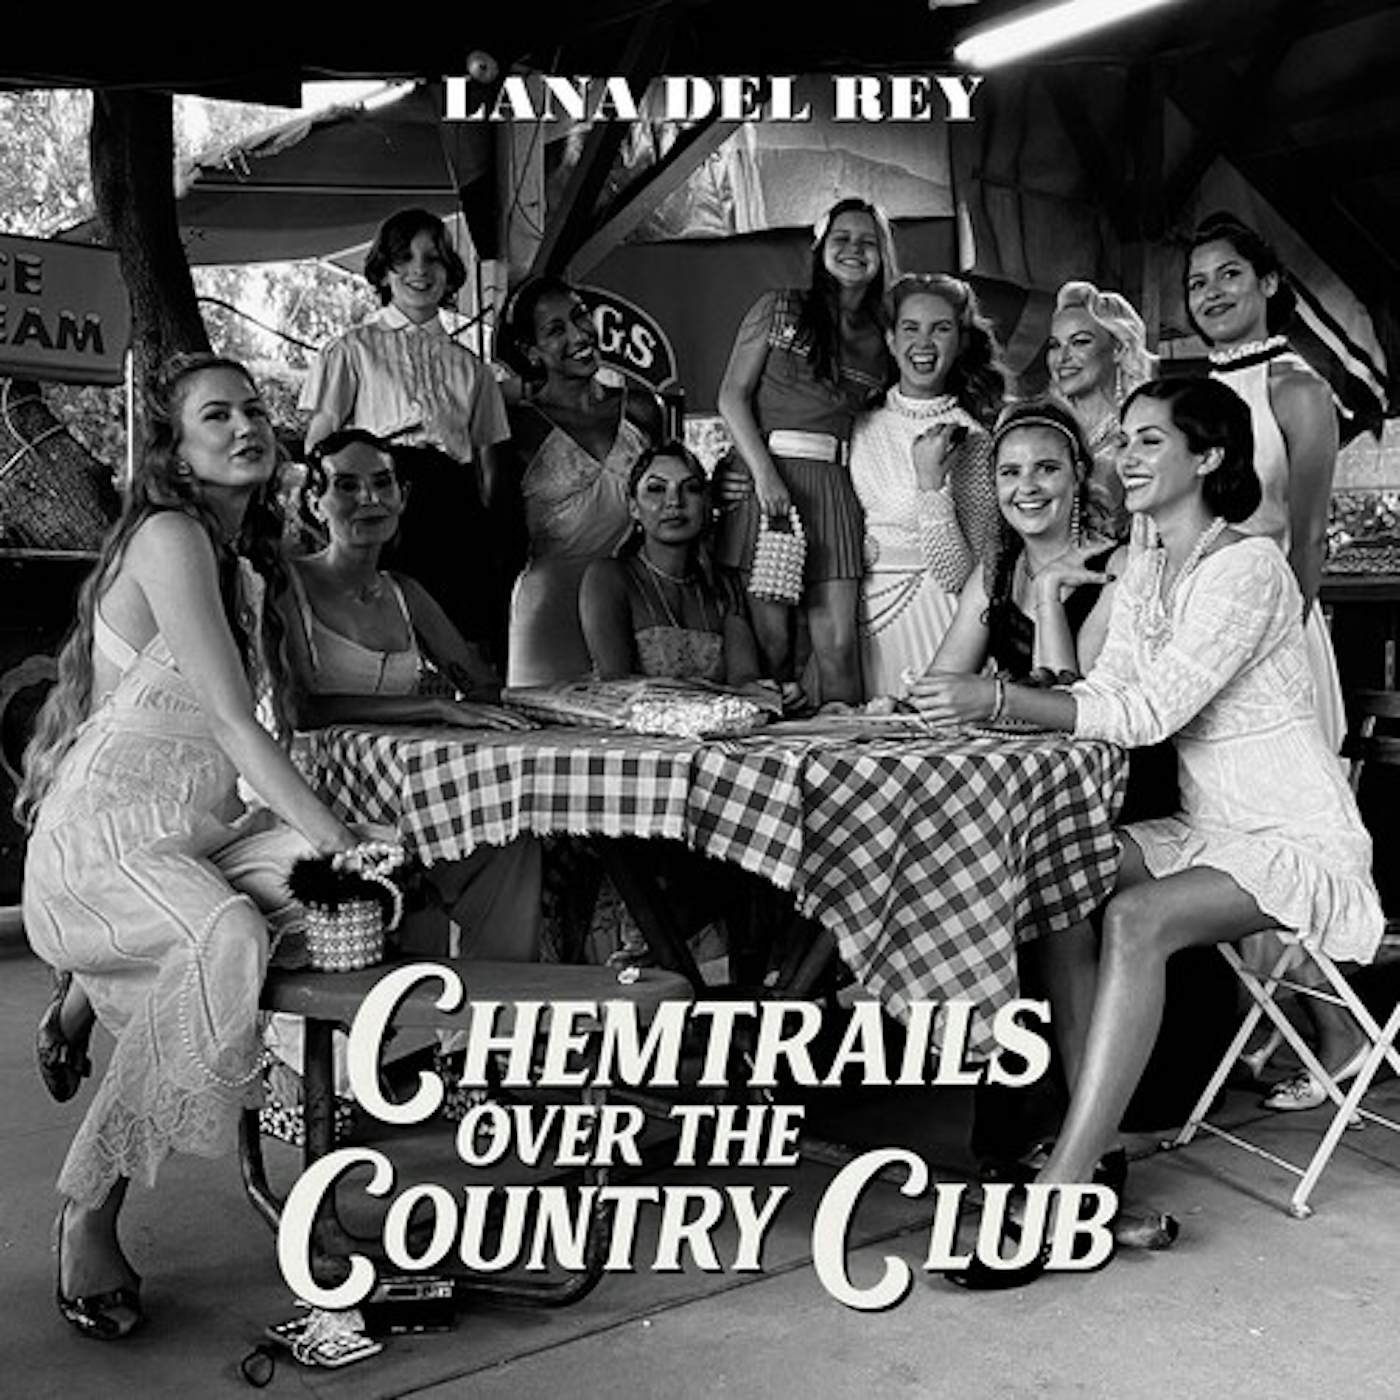 Lana Del Rey Chemtrails Over The Country Club Vinyl Record